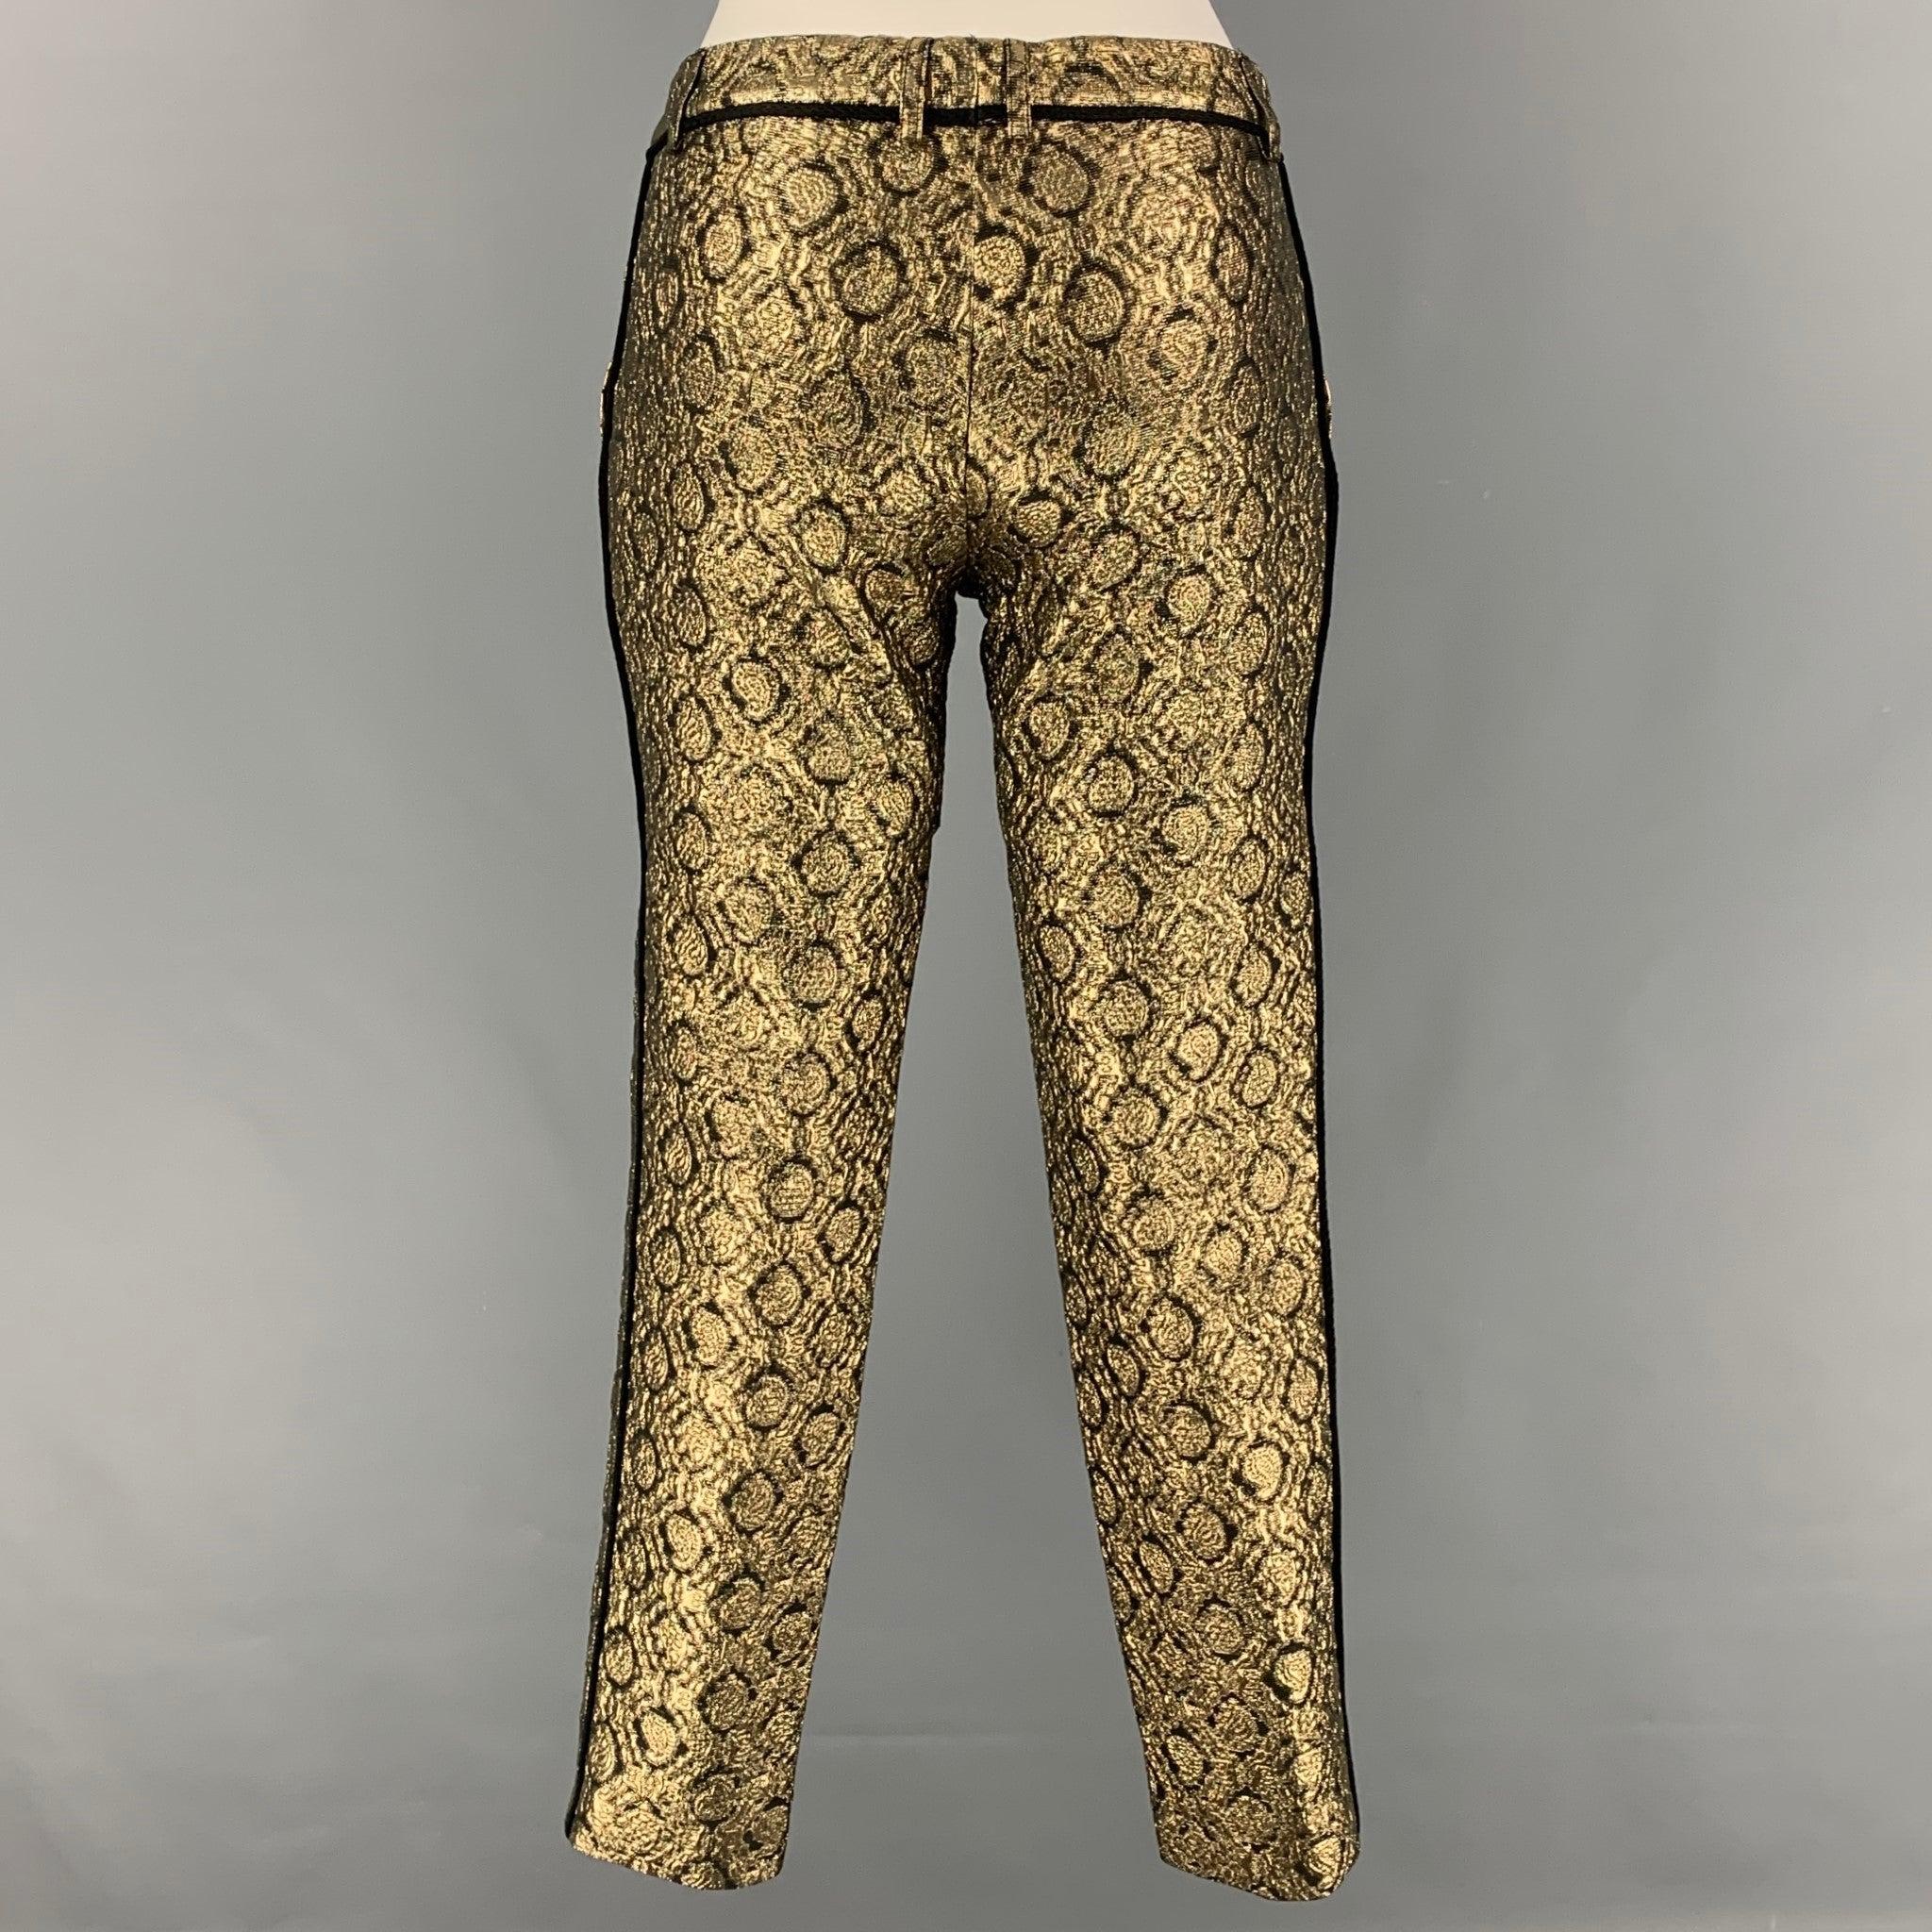 FAITH CONNEXION dress pants comes in a gold & black jacquard polyester blend featuring a tapered leg, snap button, and a zip fly closure.
Very Good
Pre-Owned Condition. 

Marked:   34 

Measurements: 
  Waist: 28 inches  Rise: 8.5 inches  Inseam: 28